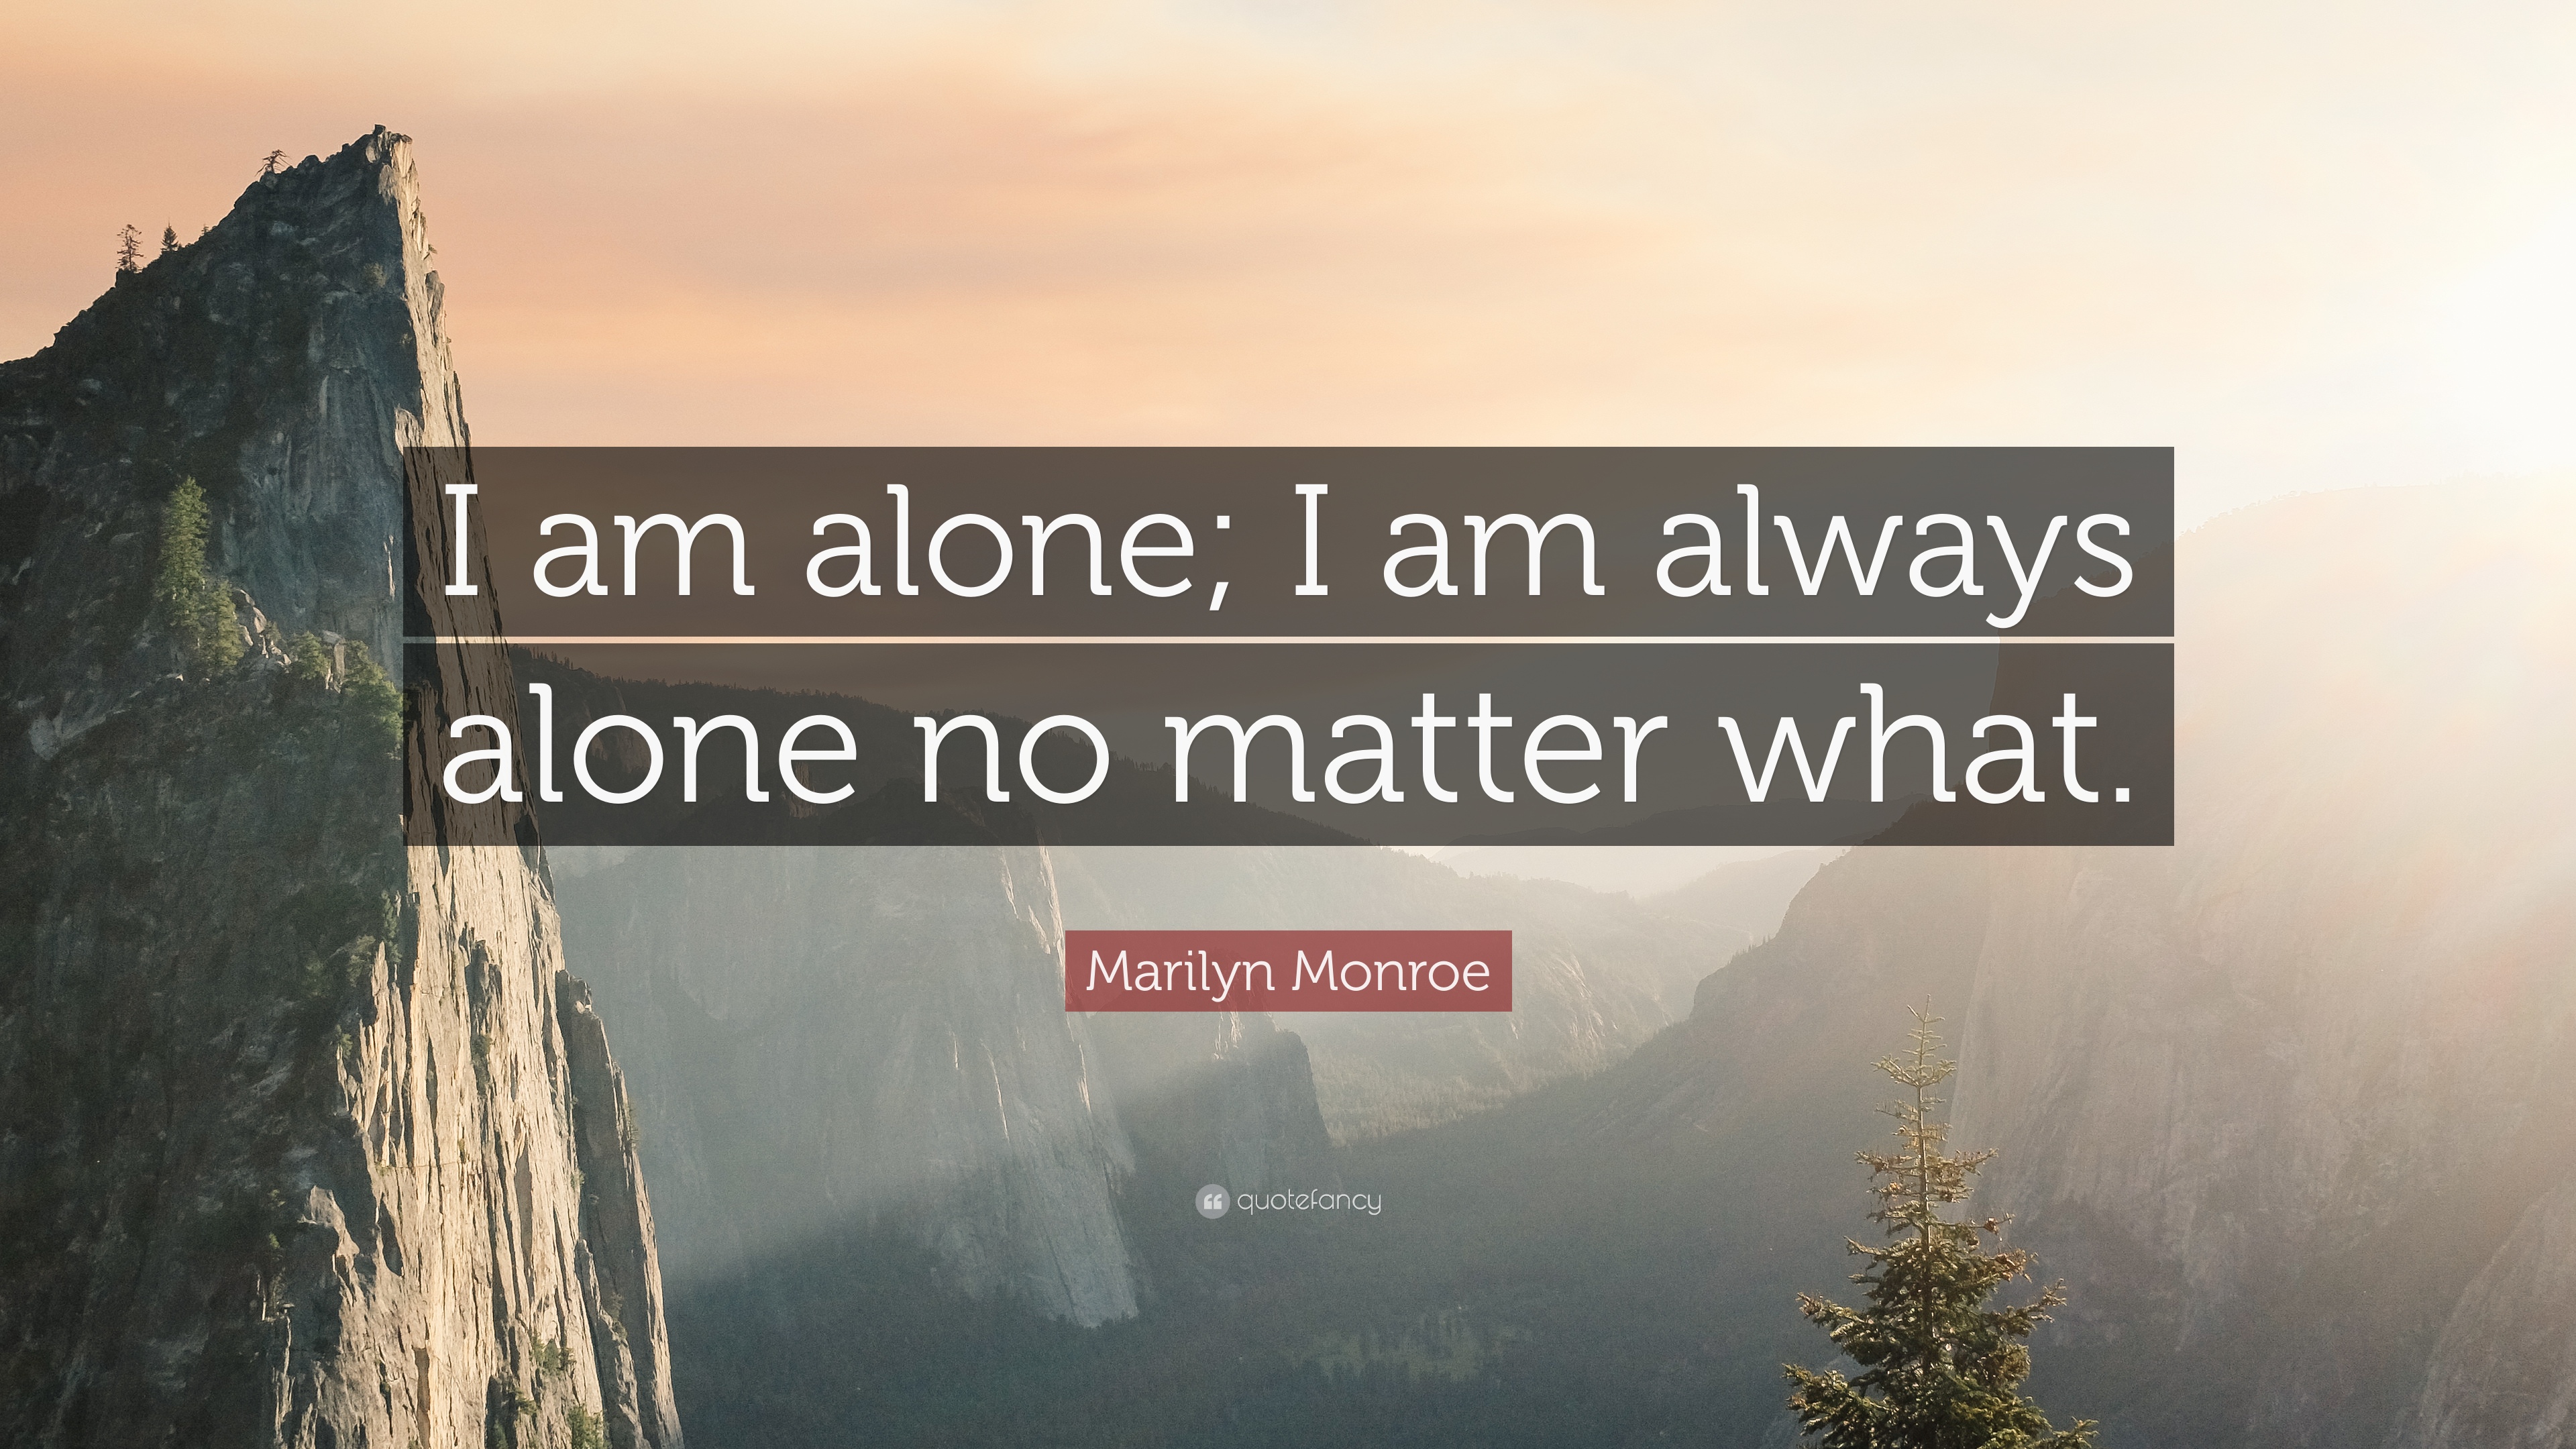 Marilyn Monroe Quote: “I am alone; I am always alone no matter what ...